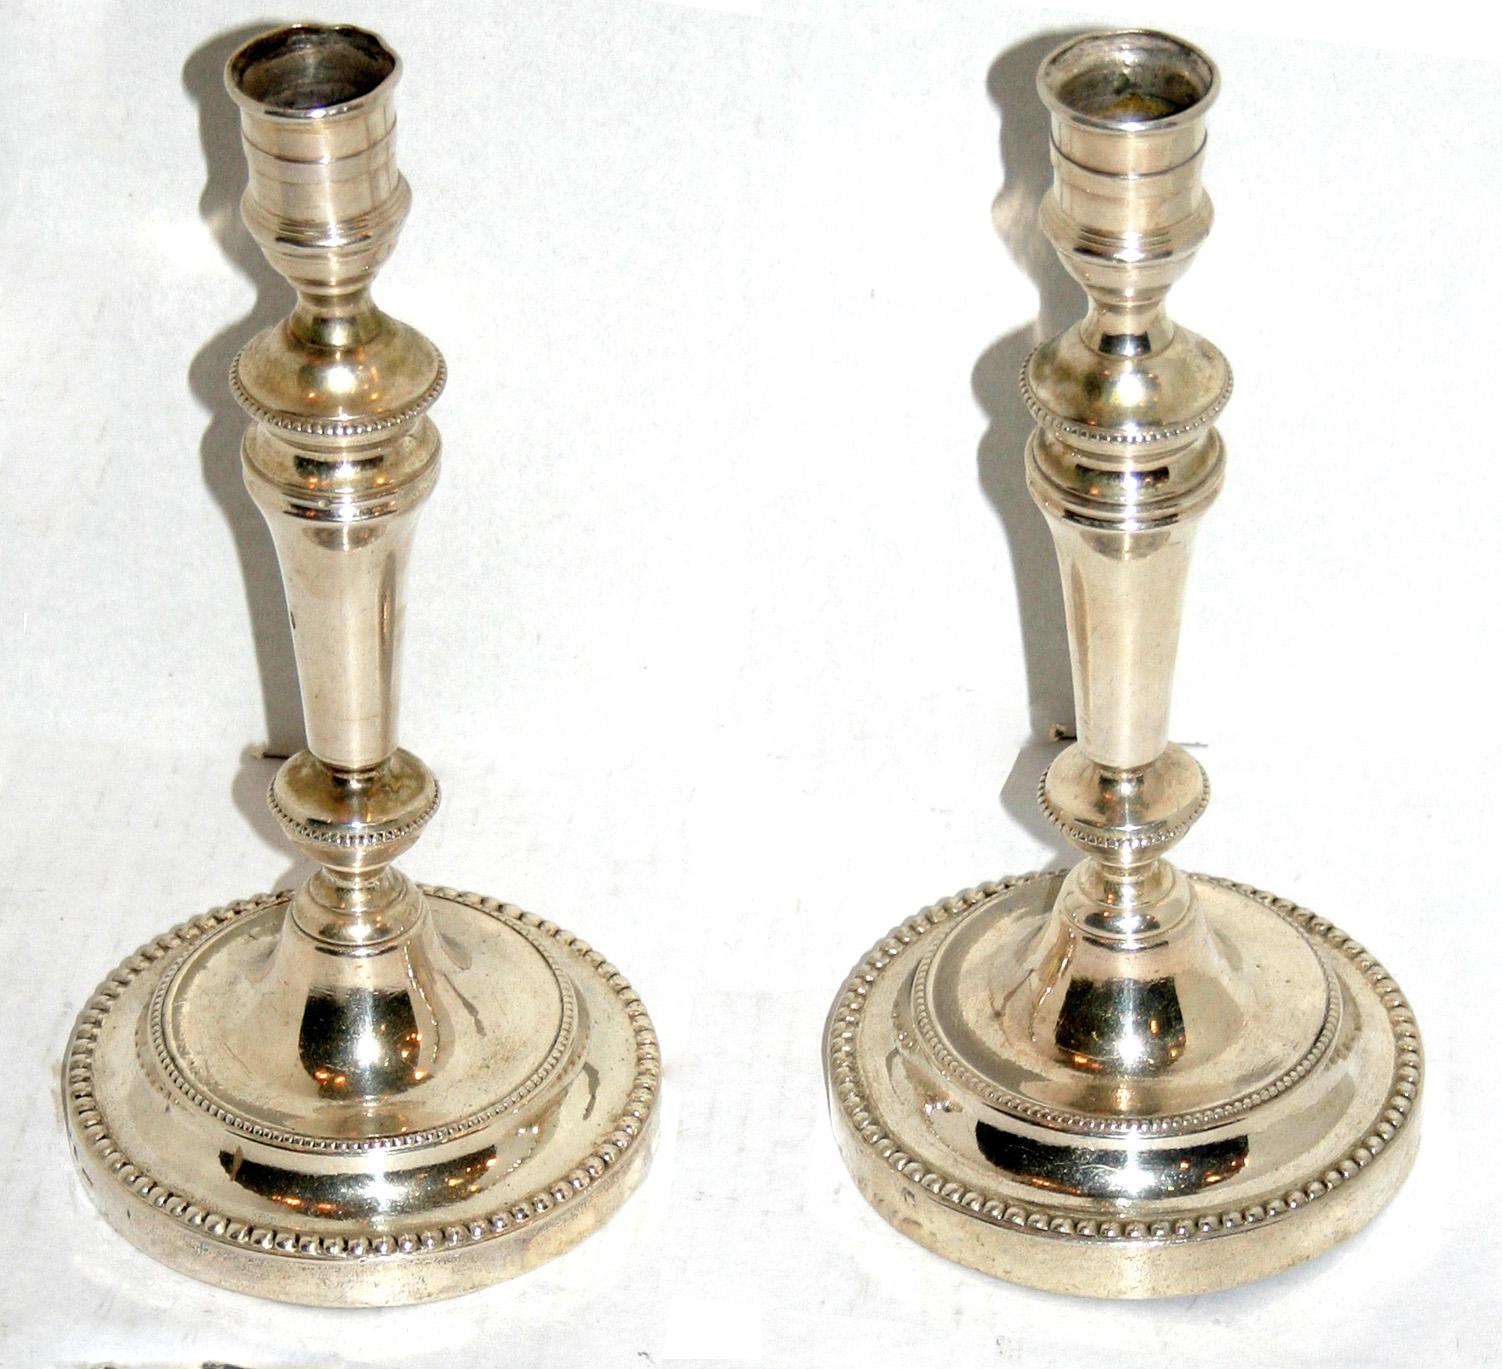 Pair of circa 1930's English silver-plated candlesticks with original finish.

Measurements:
Height: 9.5